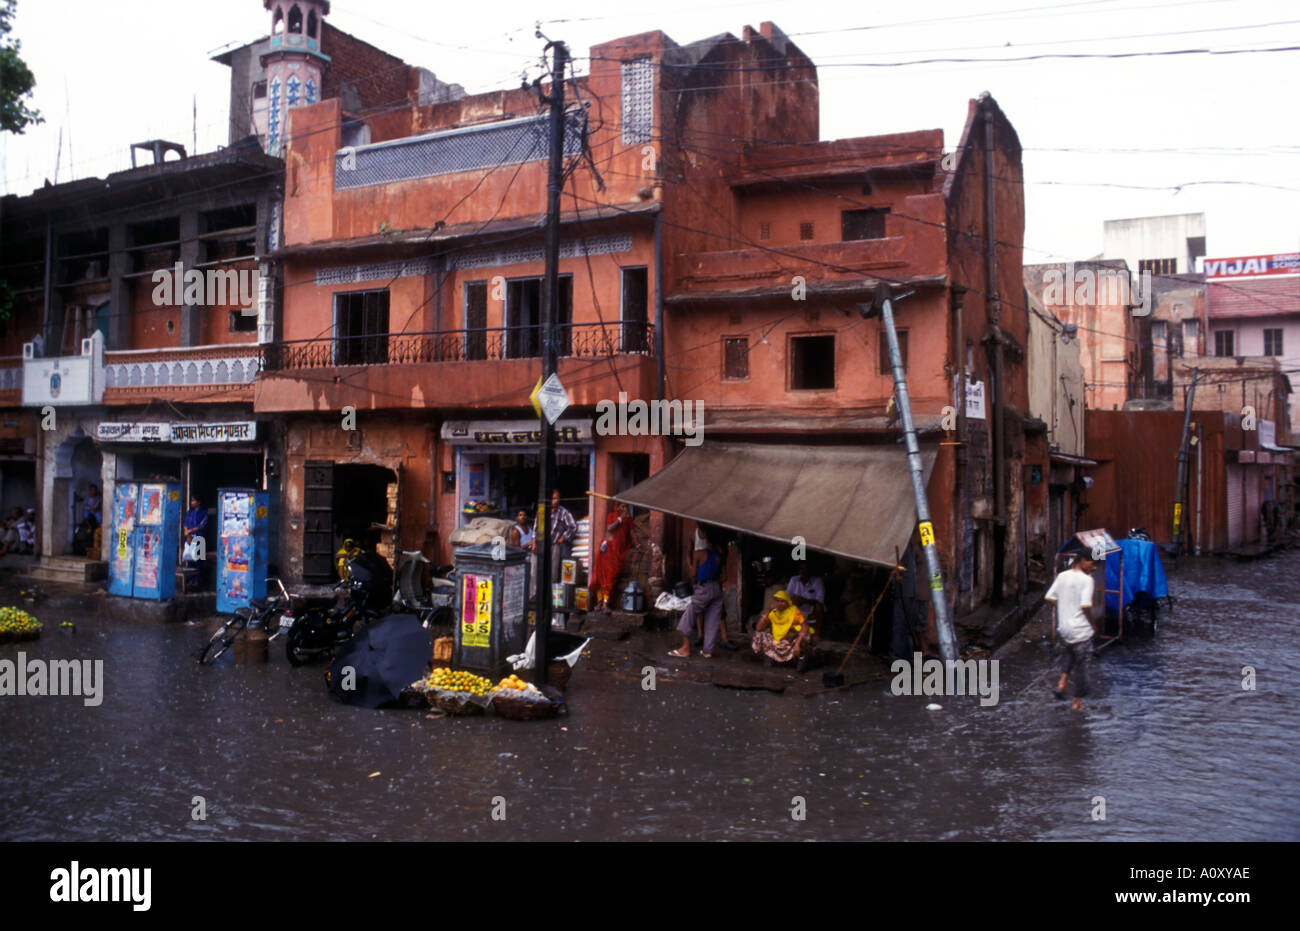 Indian monsoon season in May/June with flash floods seen here in Jaipur Stock Photo